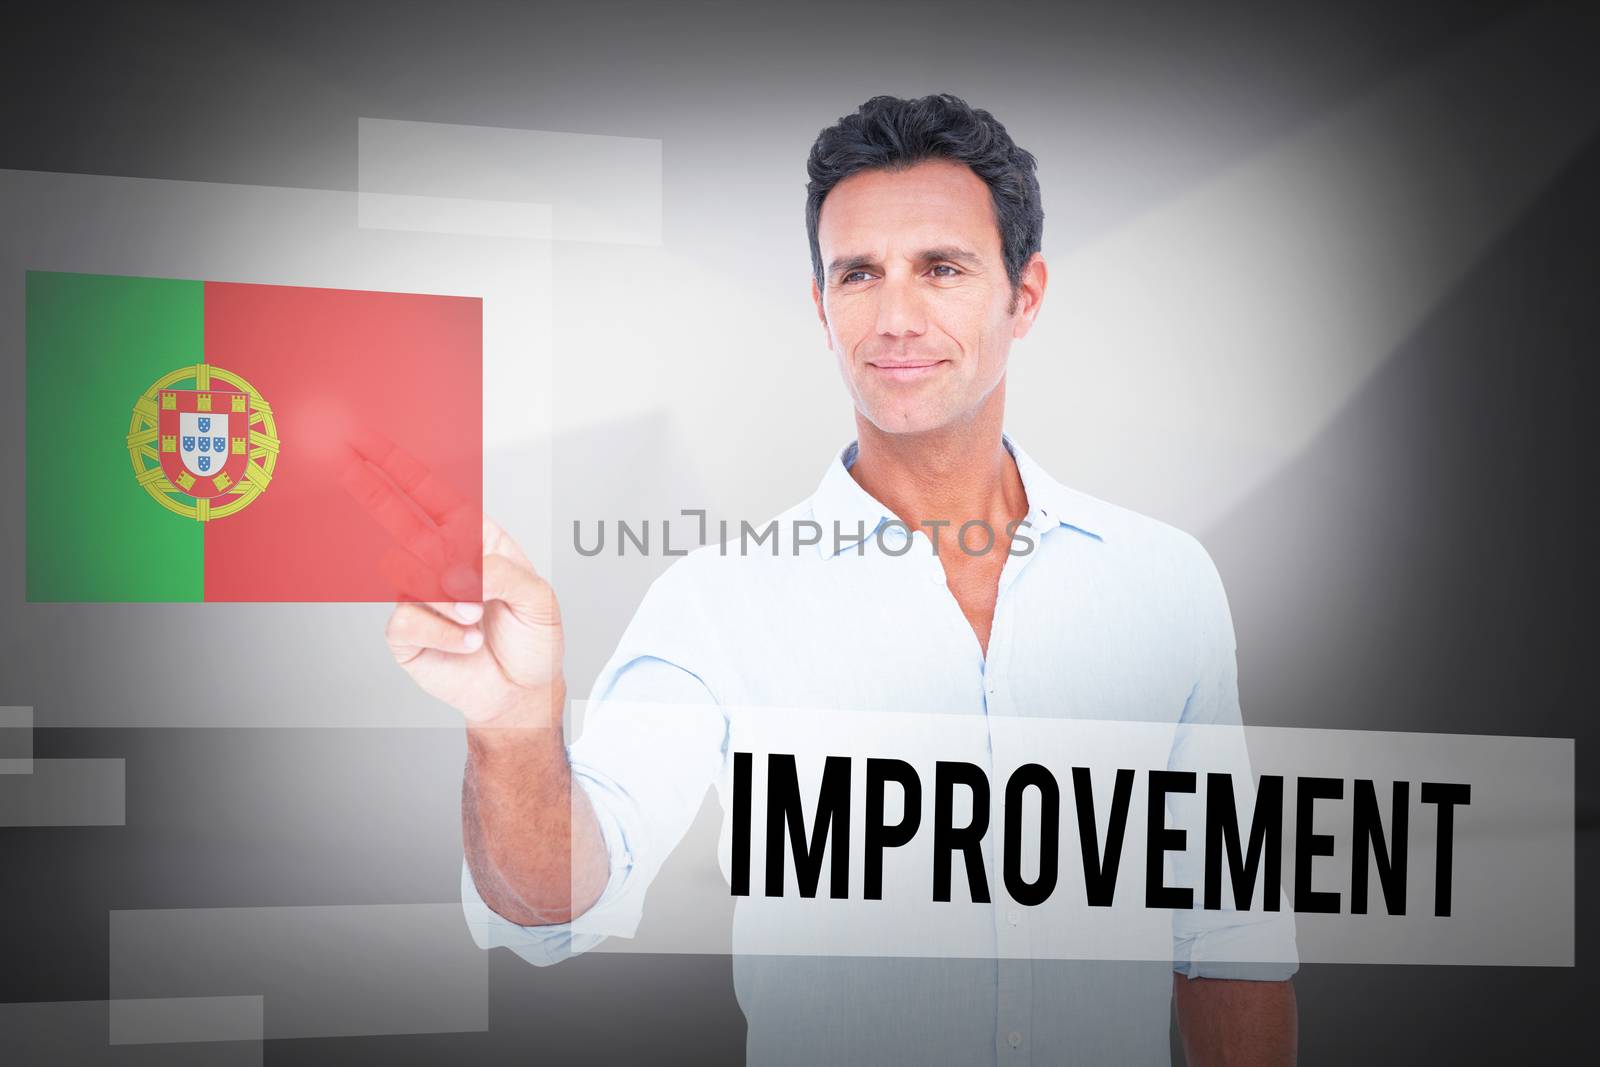 The word improvement and handsome man making gun gesture against abstract white room